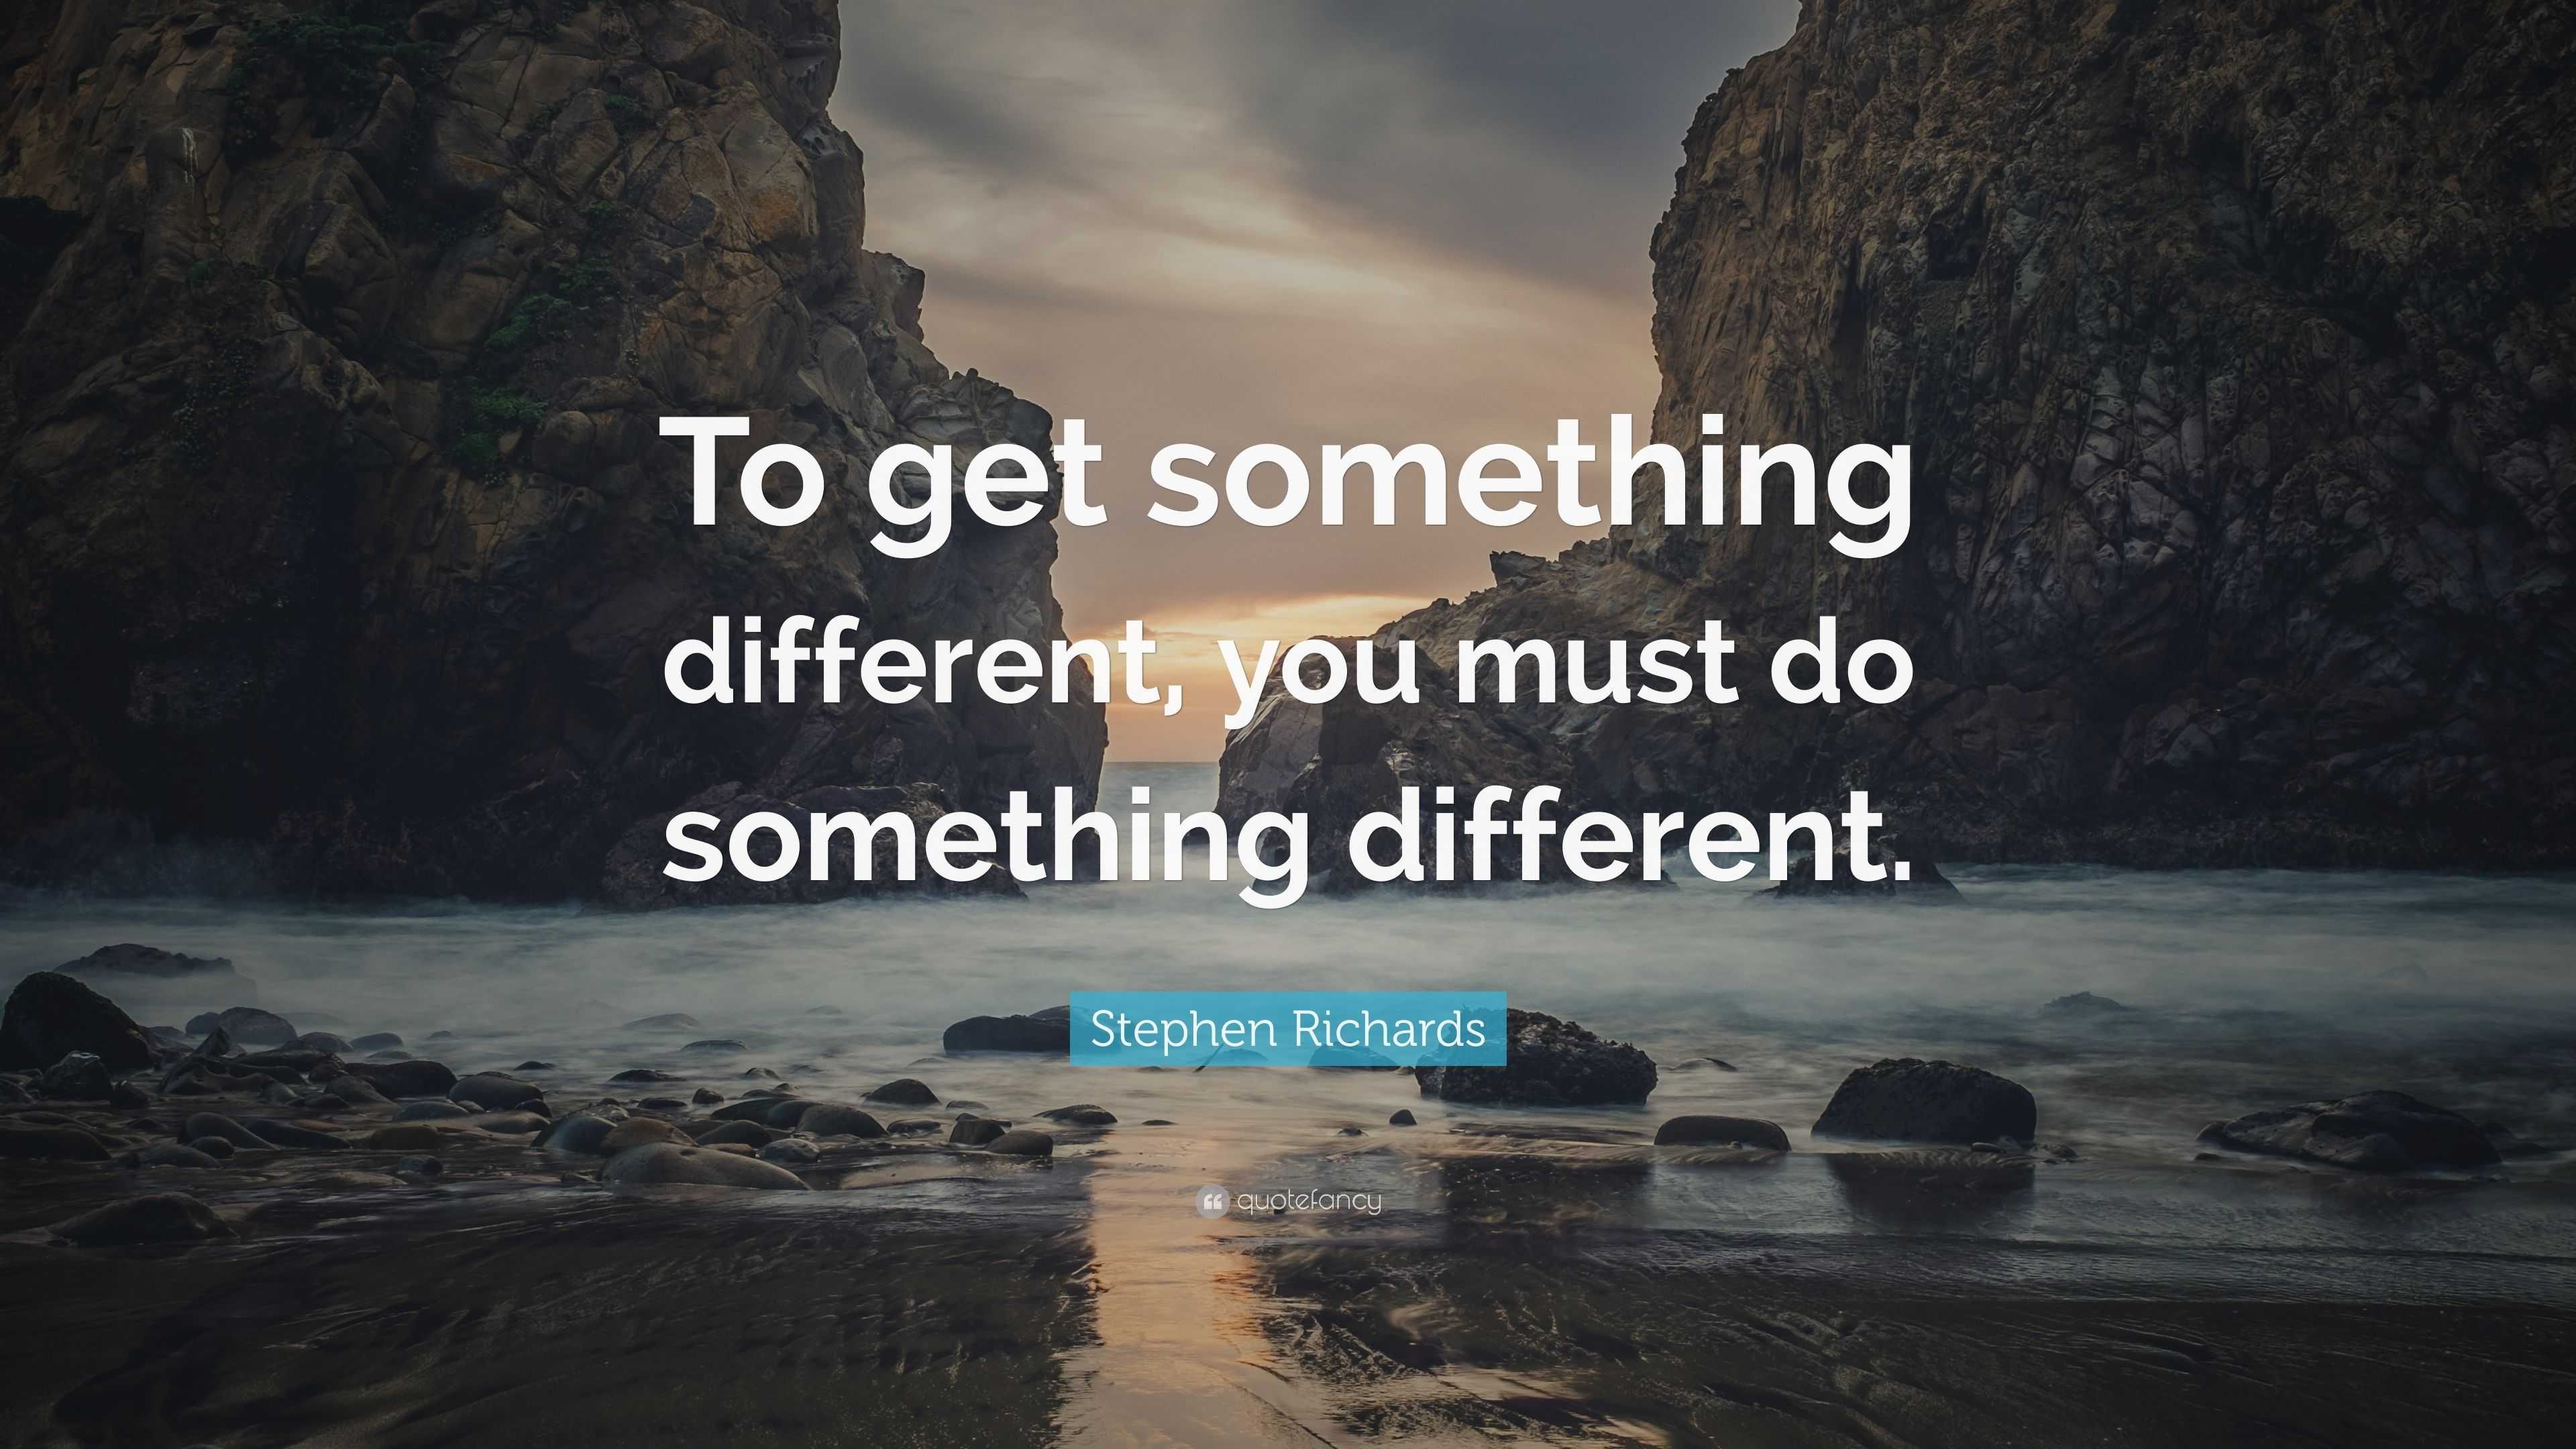 Stephen Richards Quote: “To get something different, you must do ...